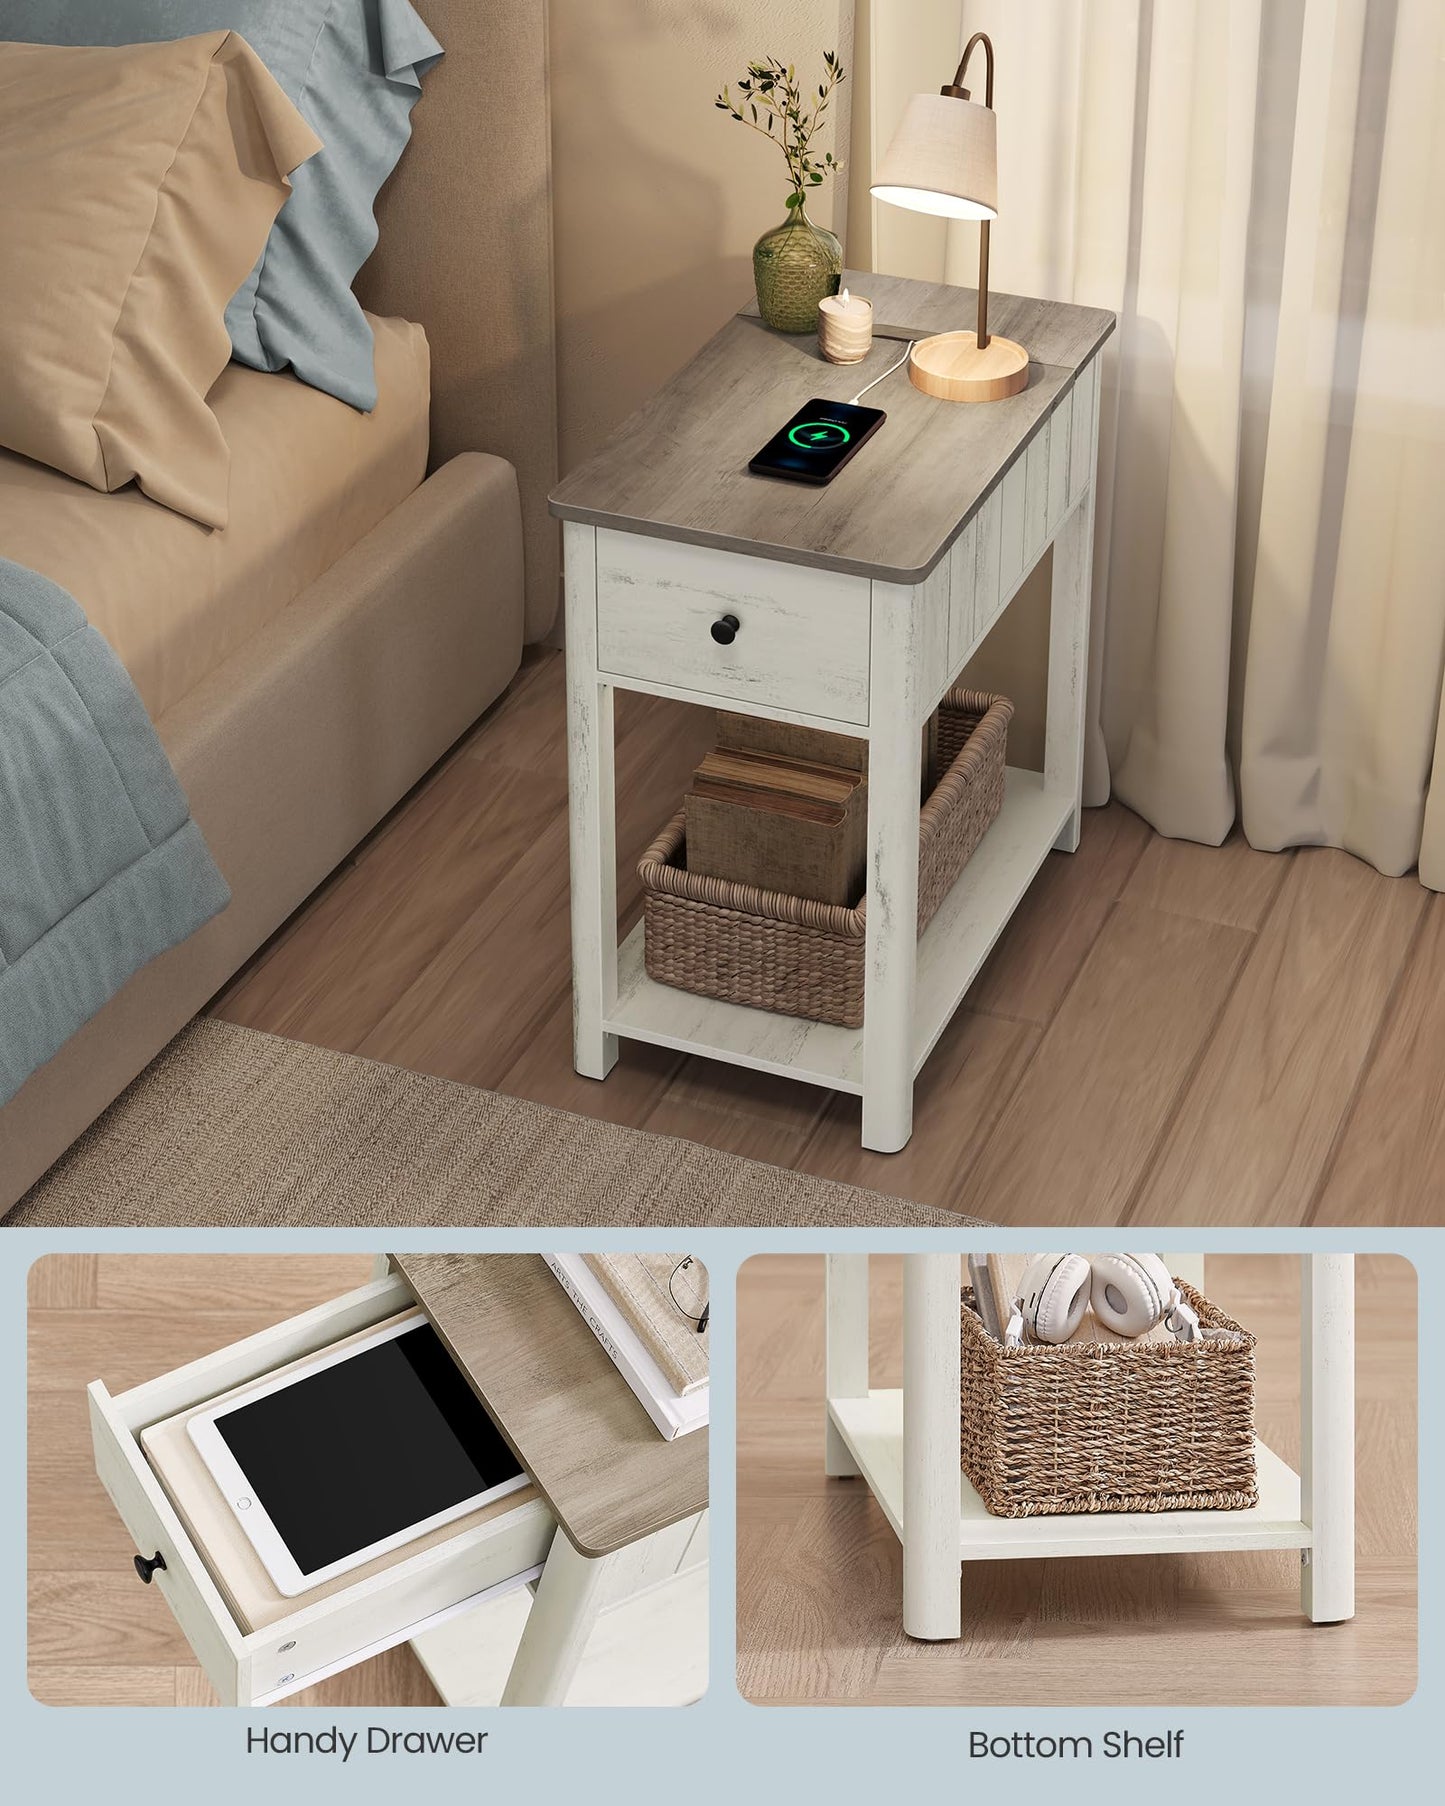 VASAGLE Side Table with Charging Station, End Table with USB Ports and Outlets, Nightstand with Storage, for Living Room, Bedroom, Modern Farmhouse Style, Vintage White and Heather Greige ULET318W73